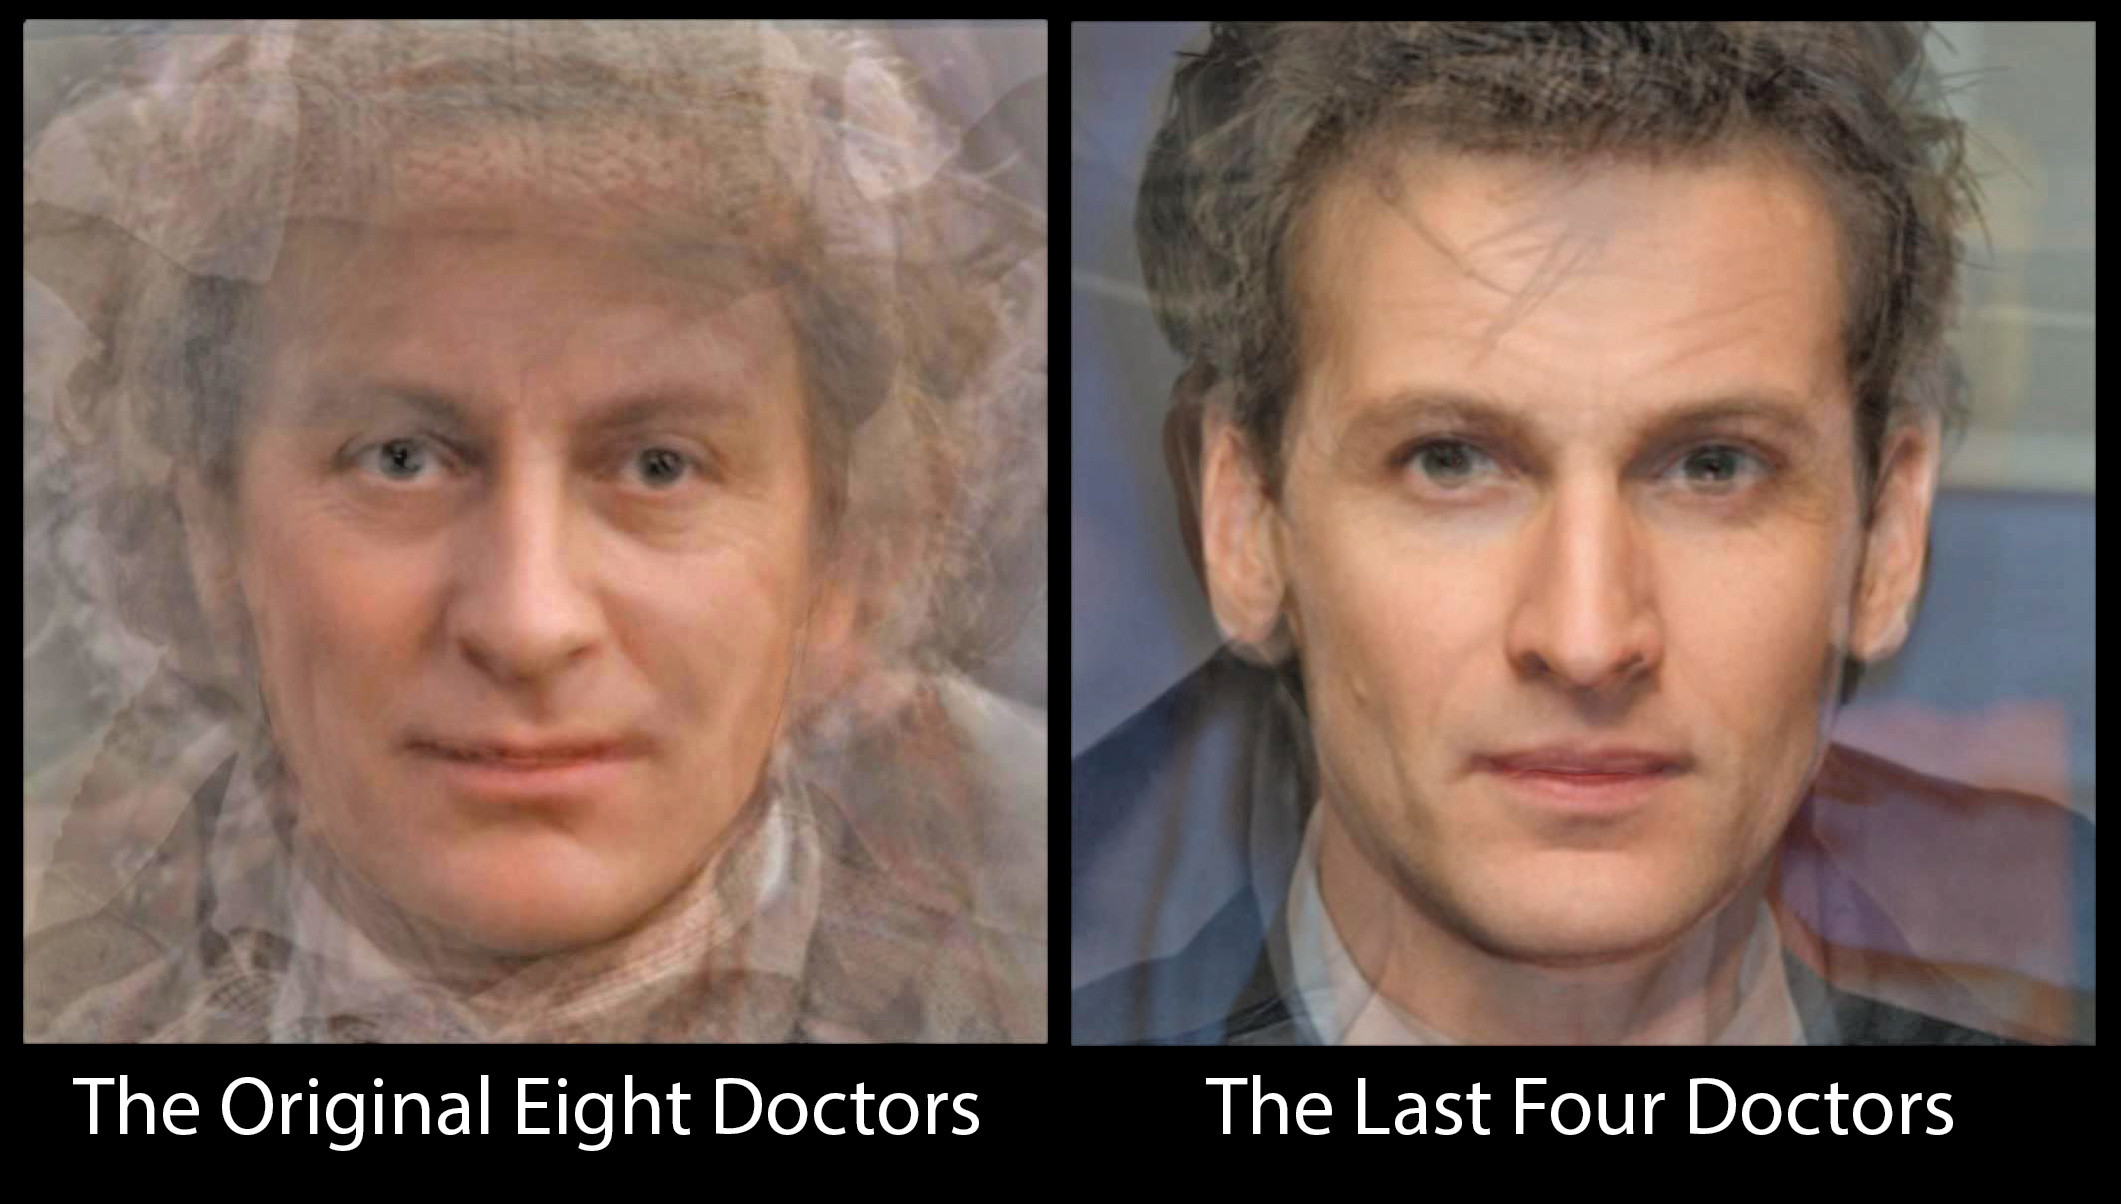 Facial Composite of the Original 8 Doctor Who Actors and the 4 Latest  Doctors